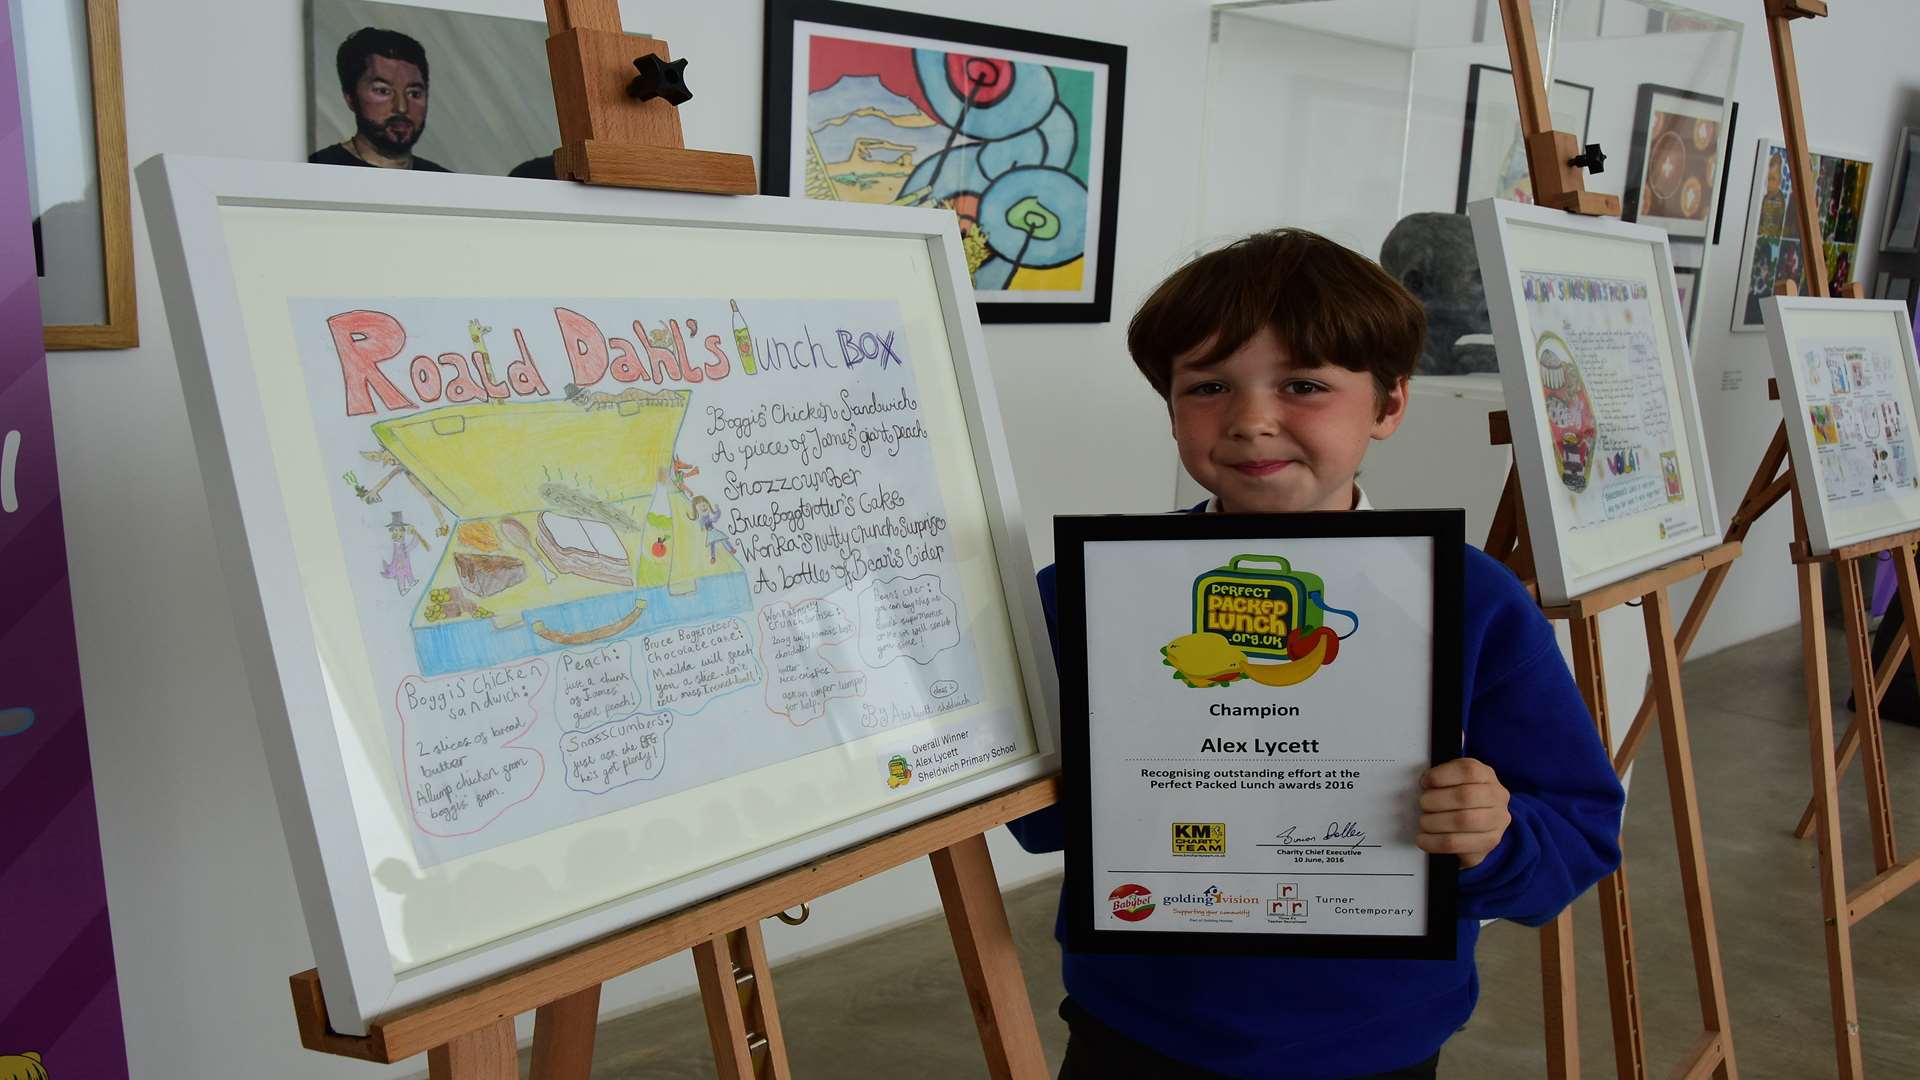 Overall champ Alex Lycett for last year's Perfect Packed Lunch Awards with his winning artwork.